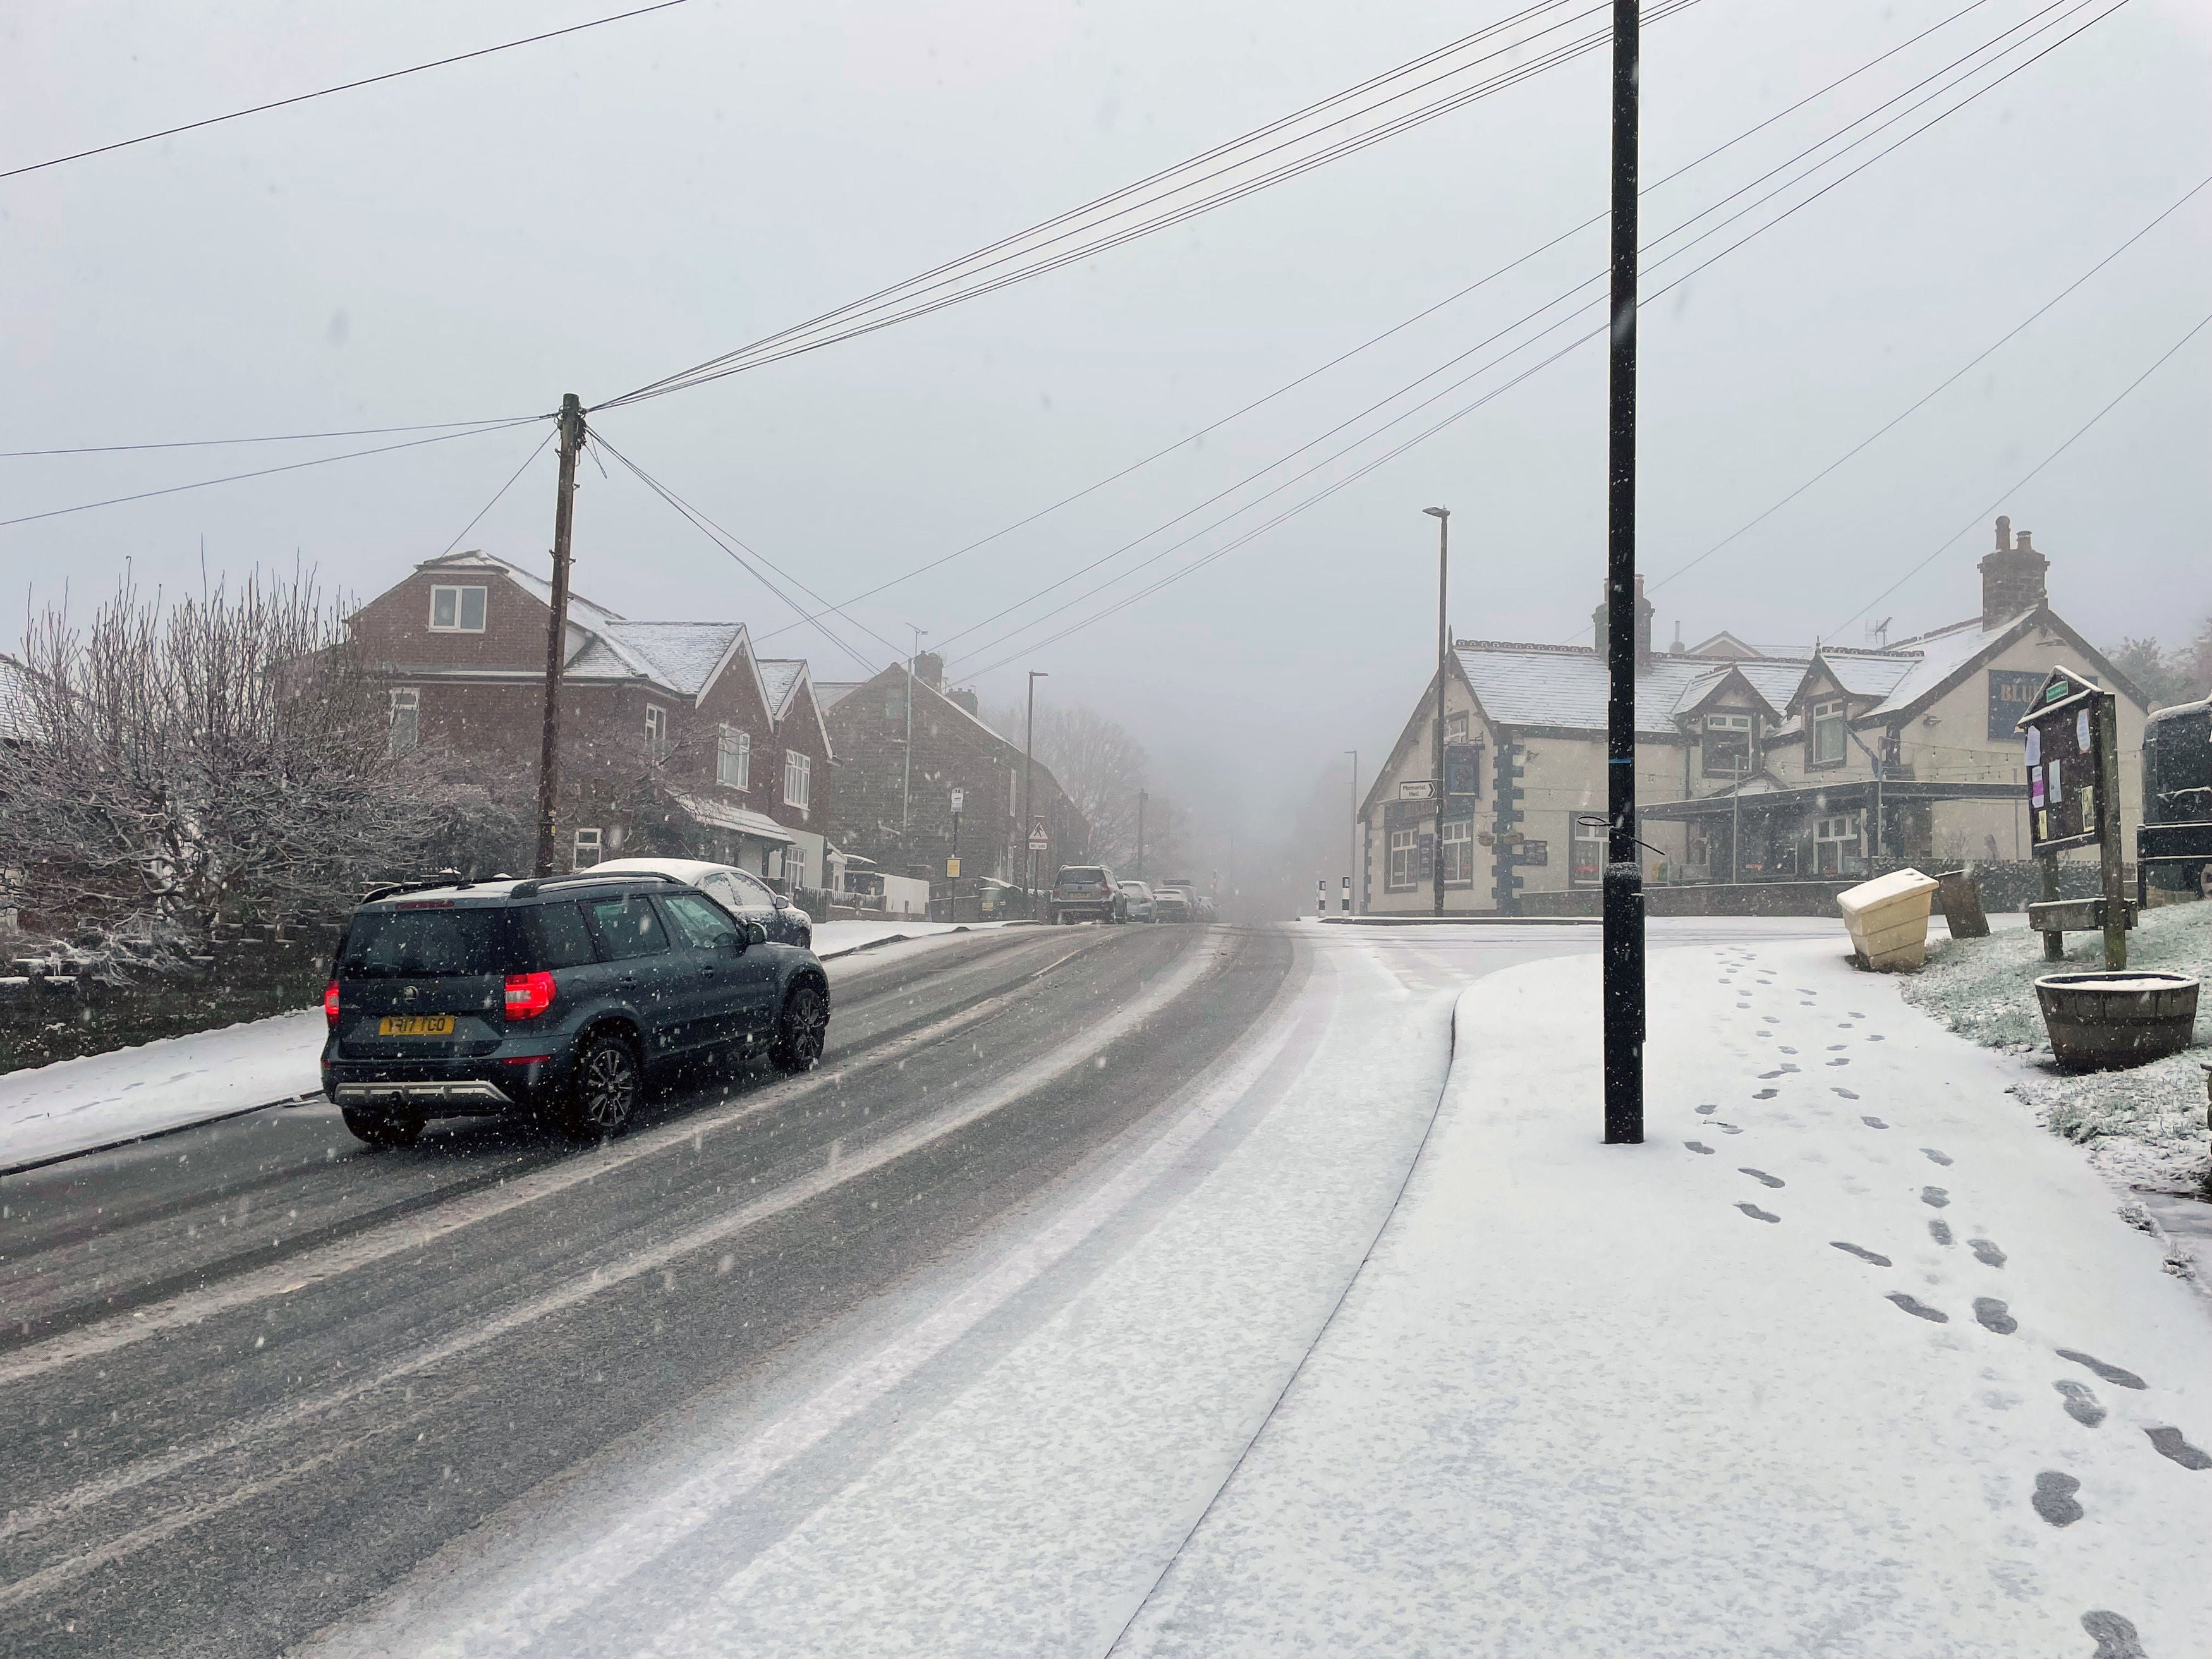 pSnow in Worrall in South Yorkshire./p